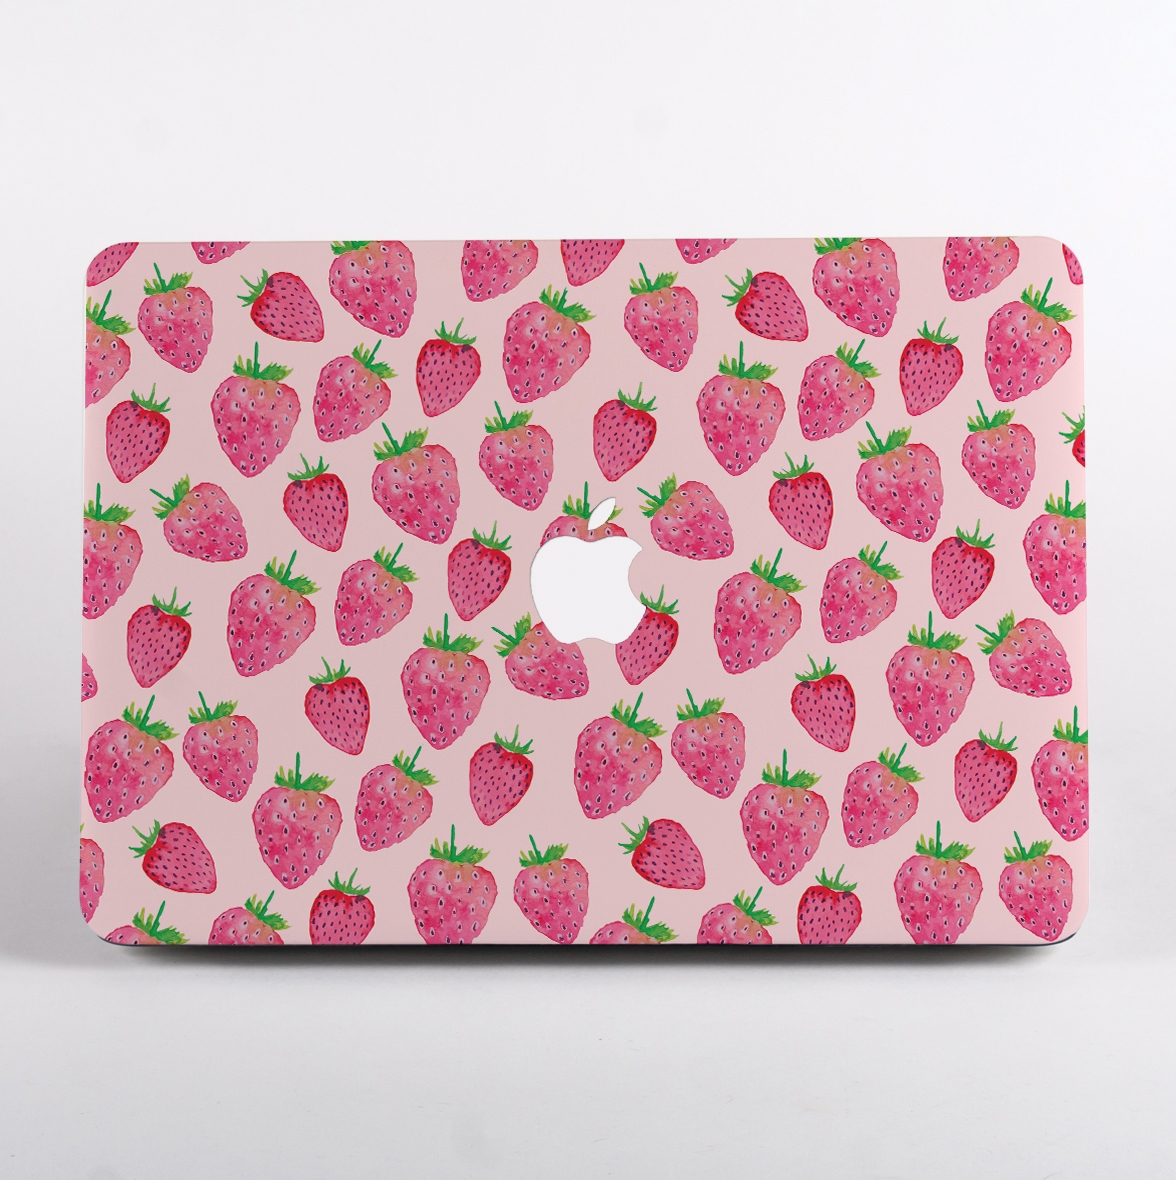 Mac Case Summer Fruit Cherry Blueberry Drink Plastic Hard Shell Compatible Mac Air 11 Pro 13 15 Laptop Cover Protection for MacBook 2016-2019 Version